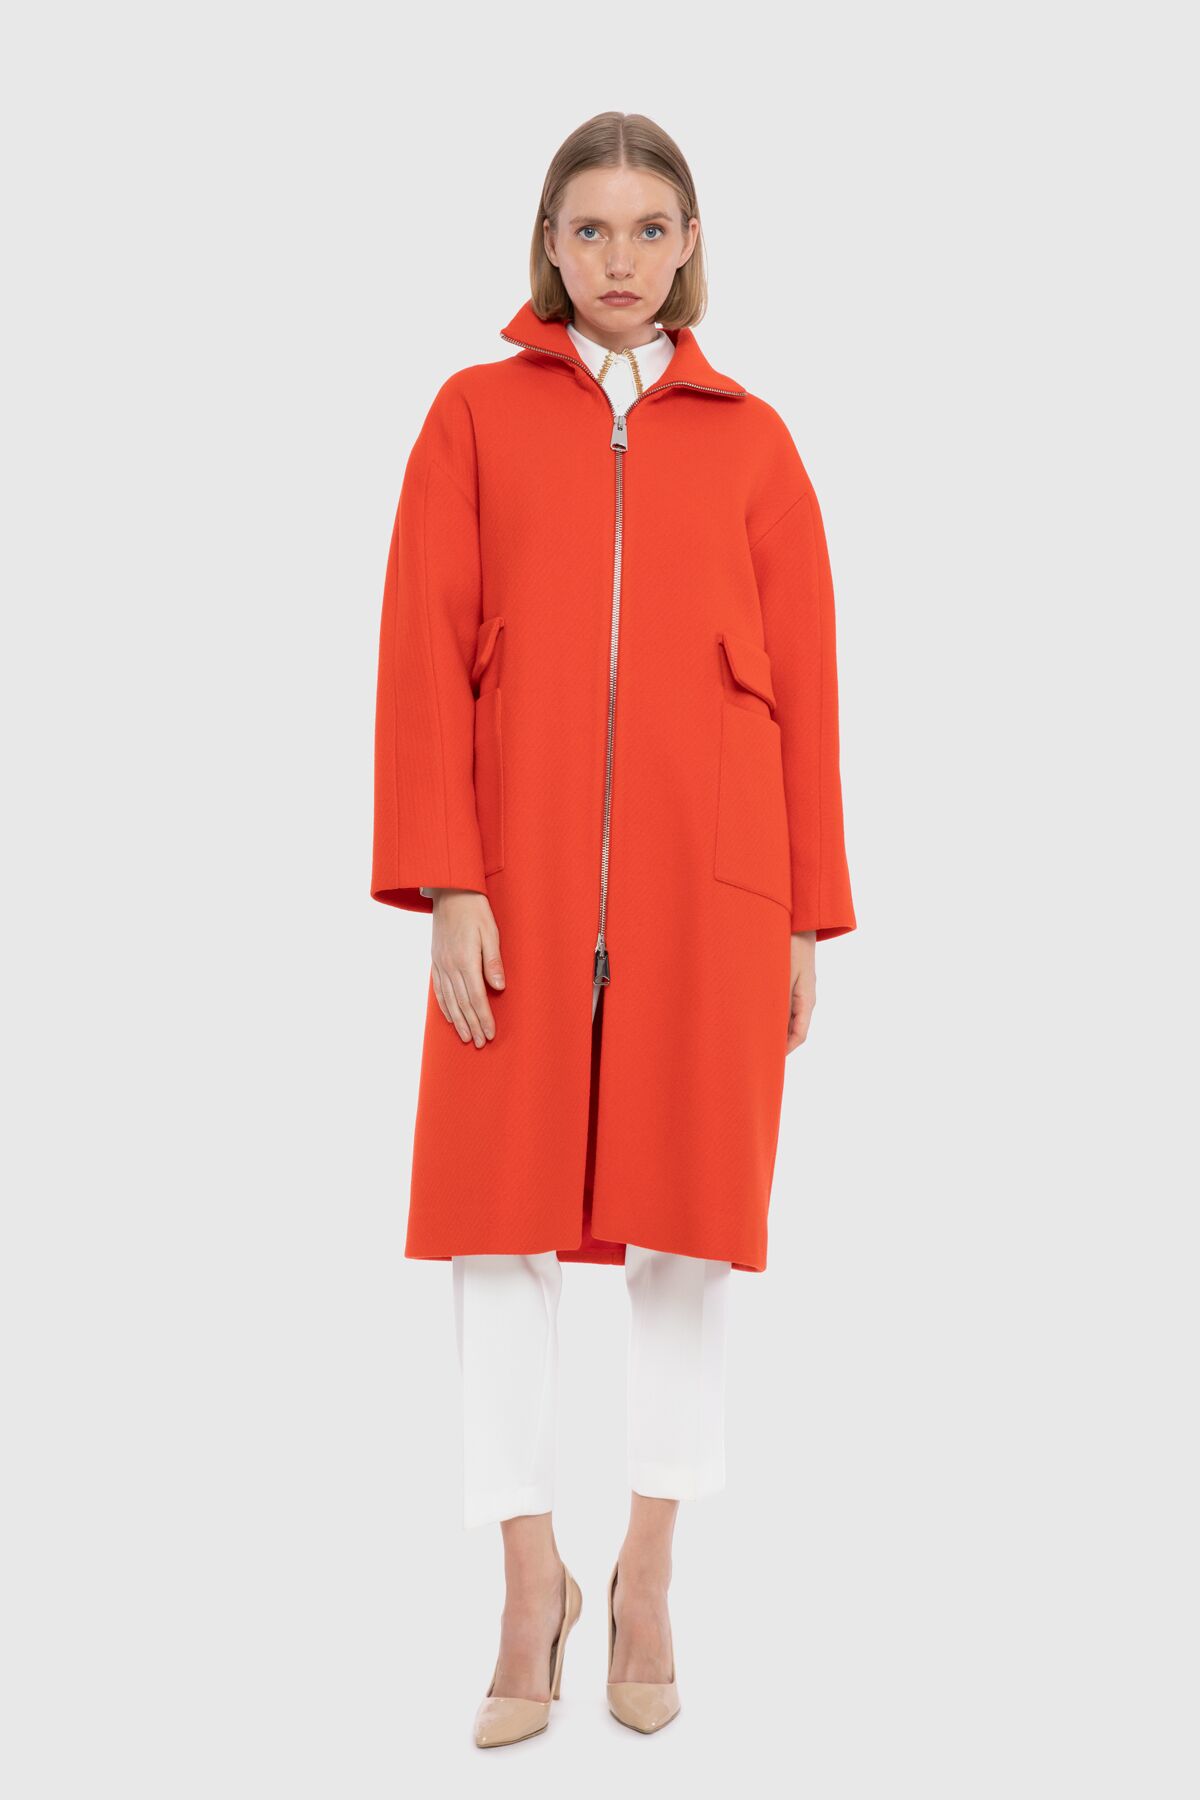  GIZIA - Zipper Detailed Stand Up Collar Red Cachet Coat